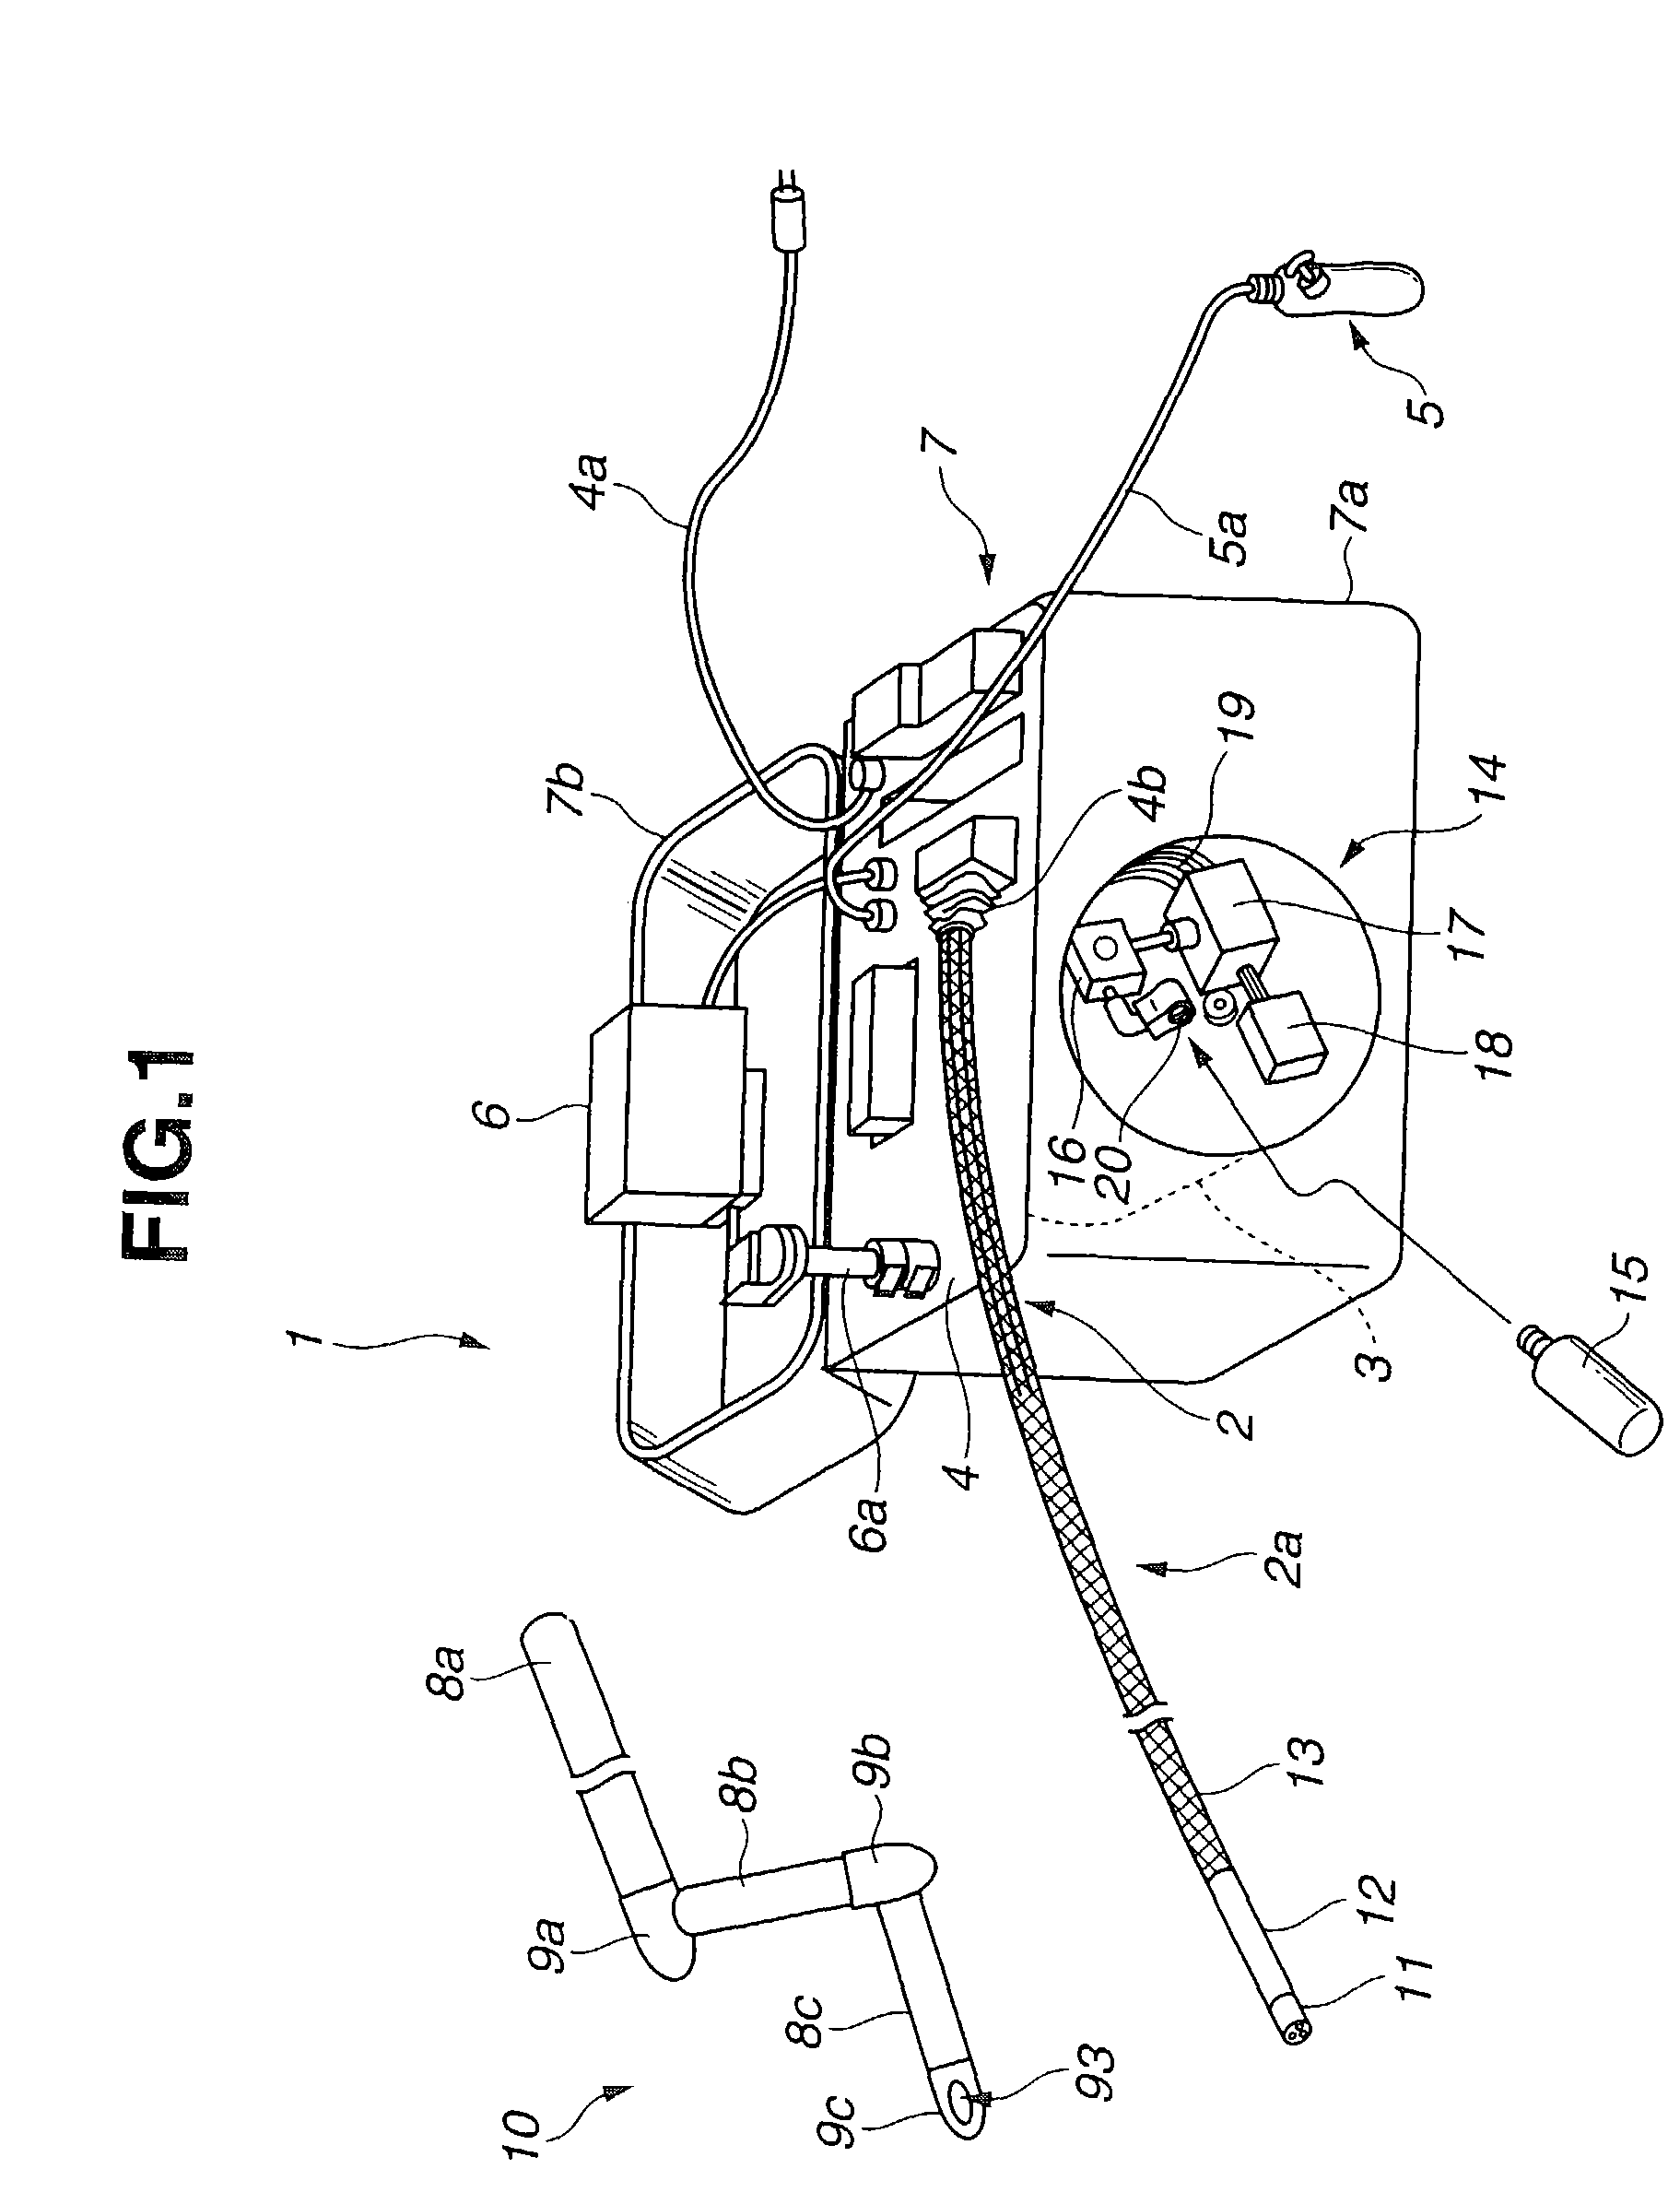 Endoscope system with insertion direction changing guides